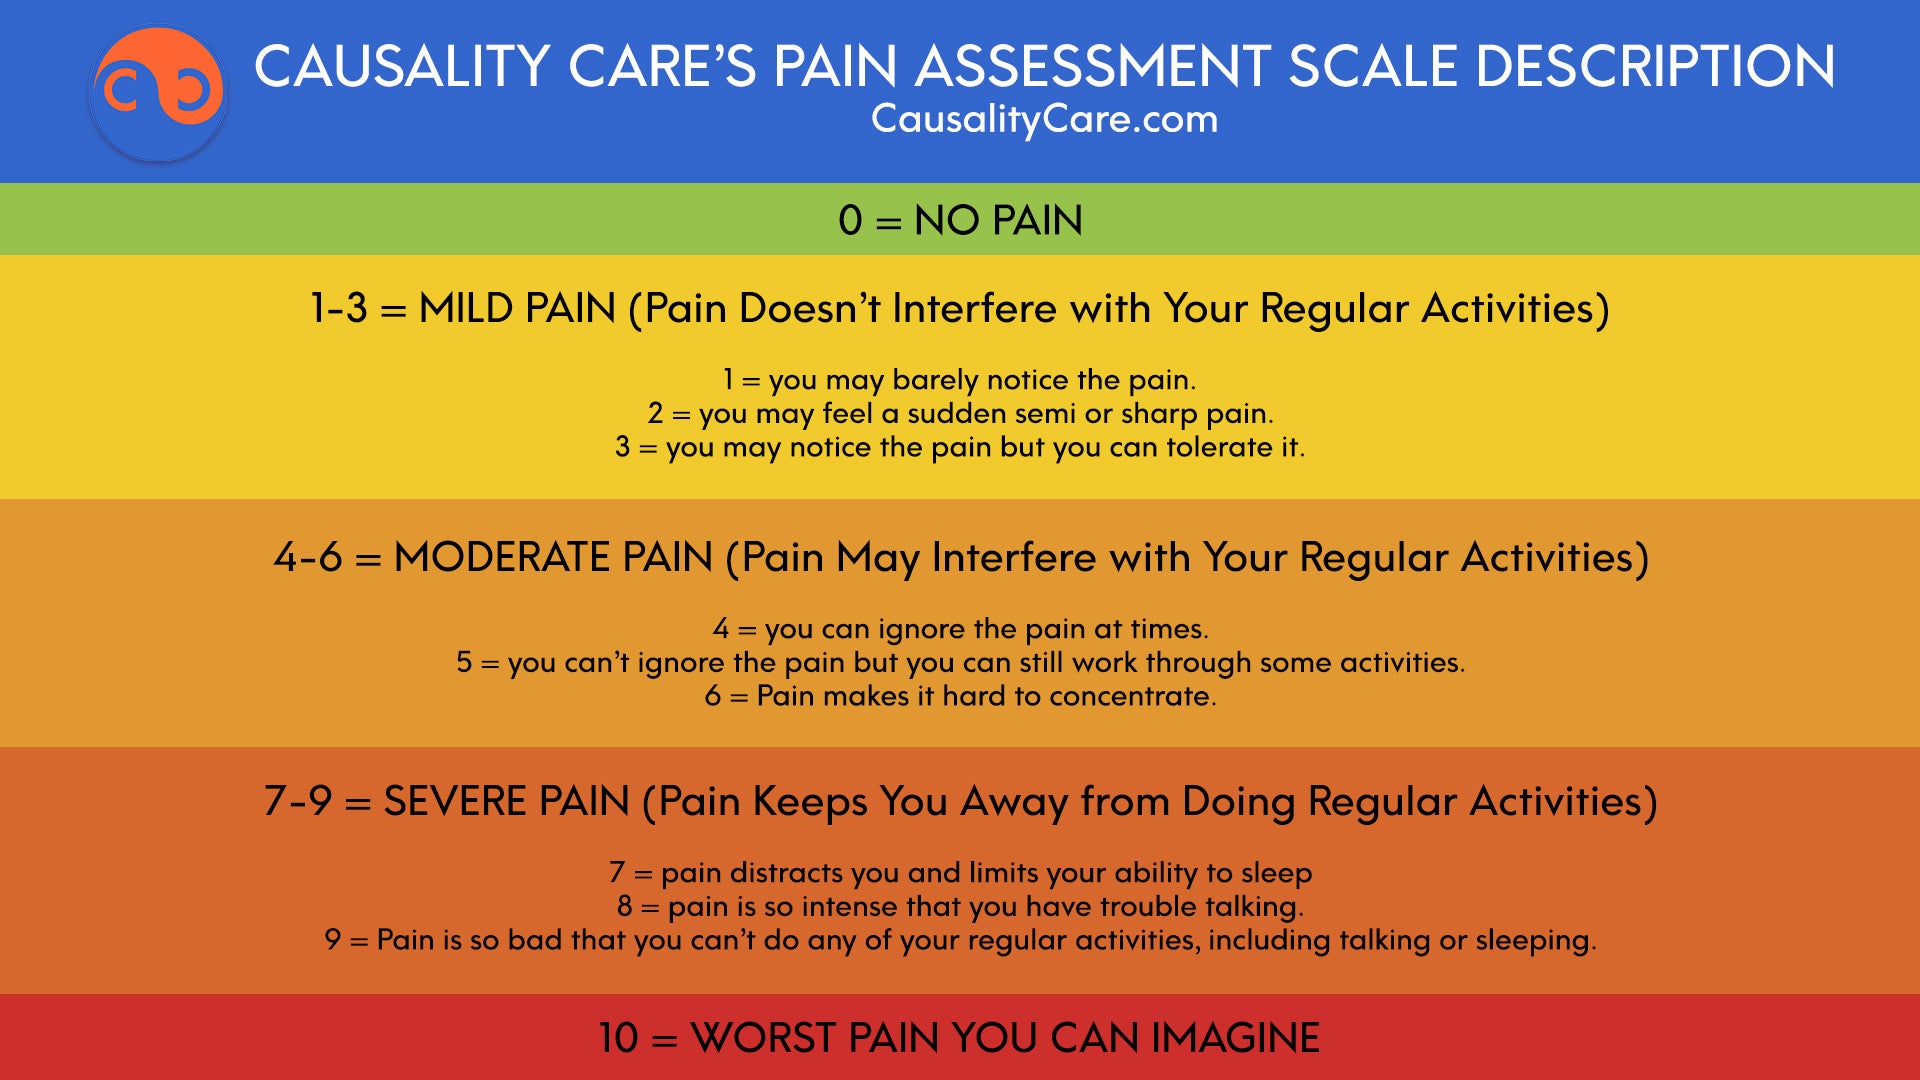 Reassessing the assessment of pain: how the numeric scale became so popular  in health care - WHYY